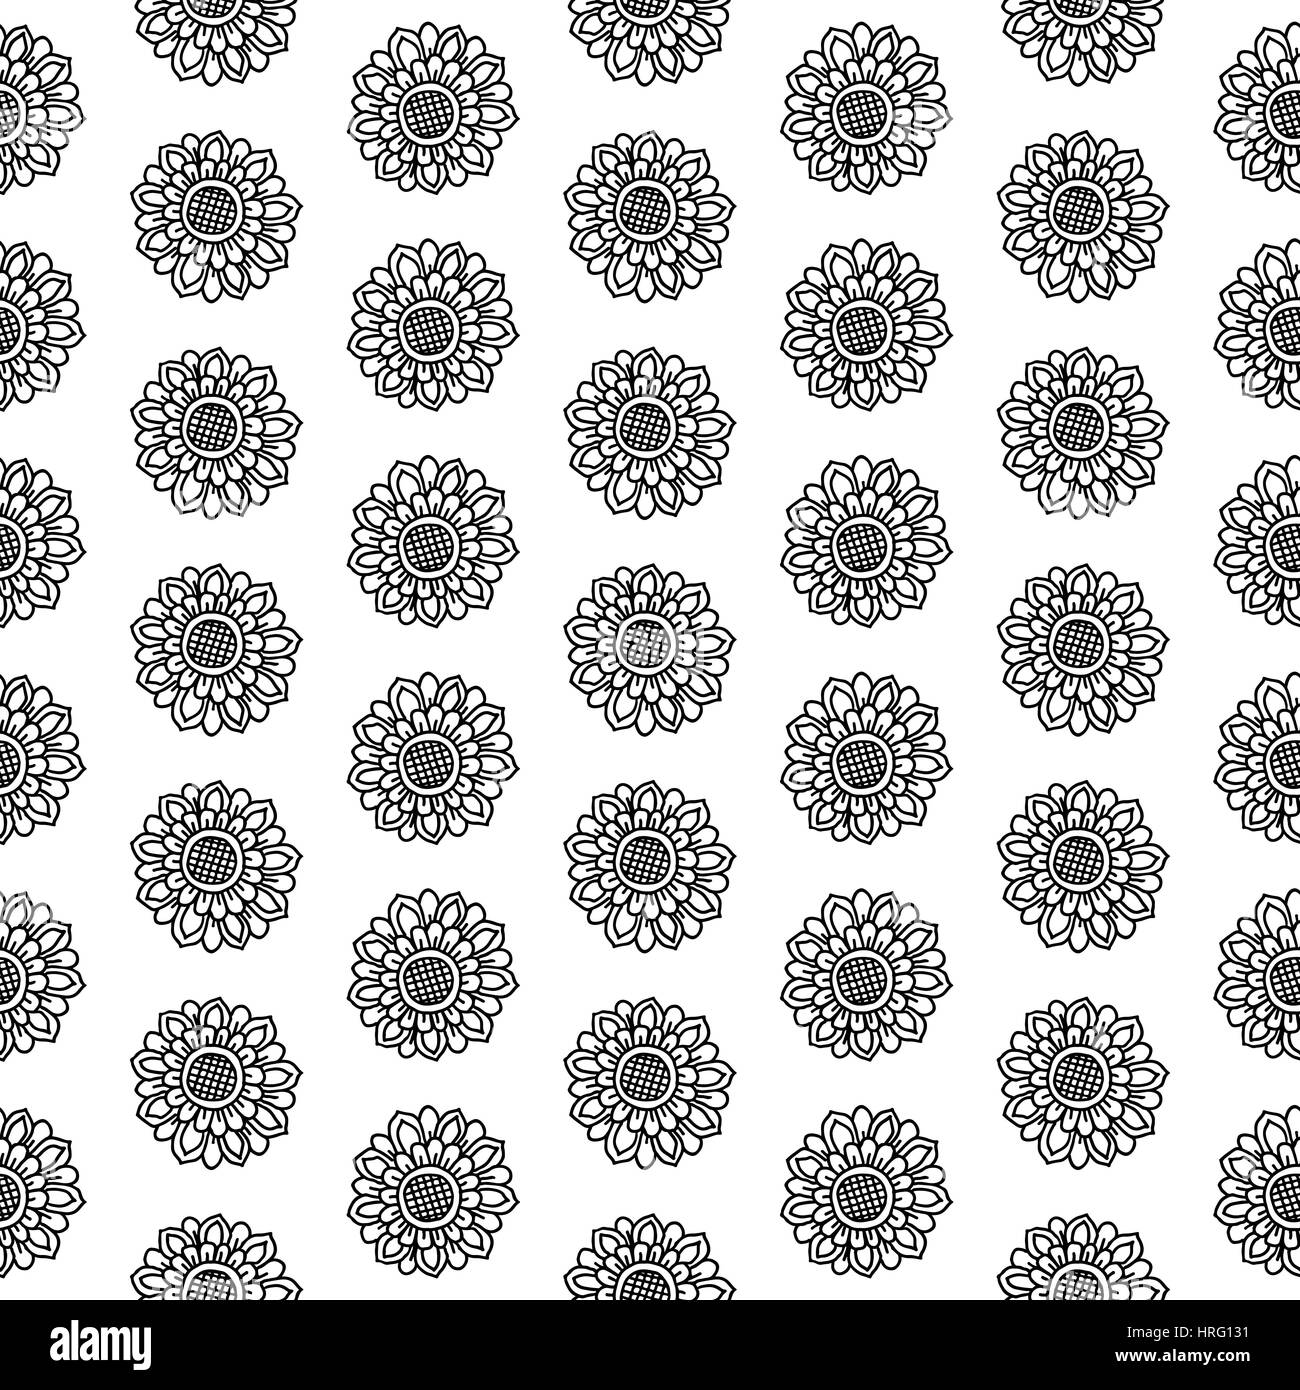 Paisley seamless vector pattern. Ethnic floral motif, primitive oriental flowers, dotted layout, black on white background. Stock Vector